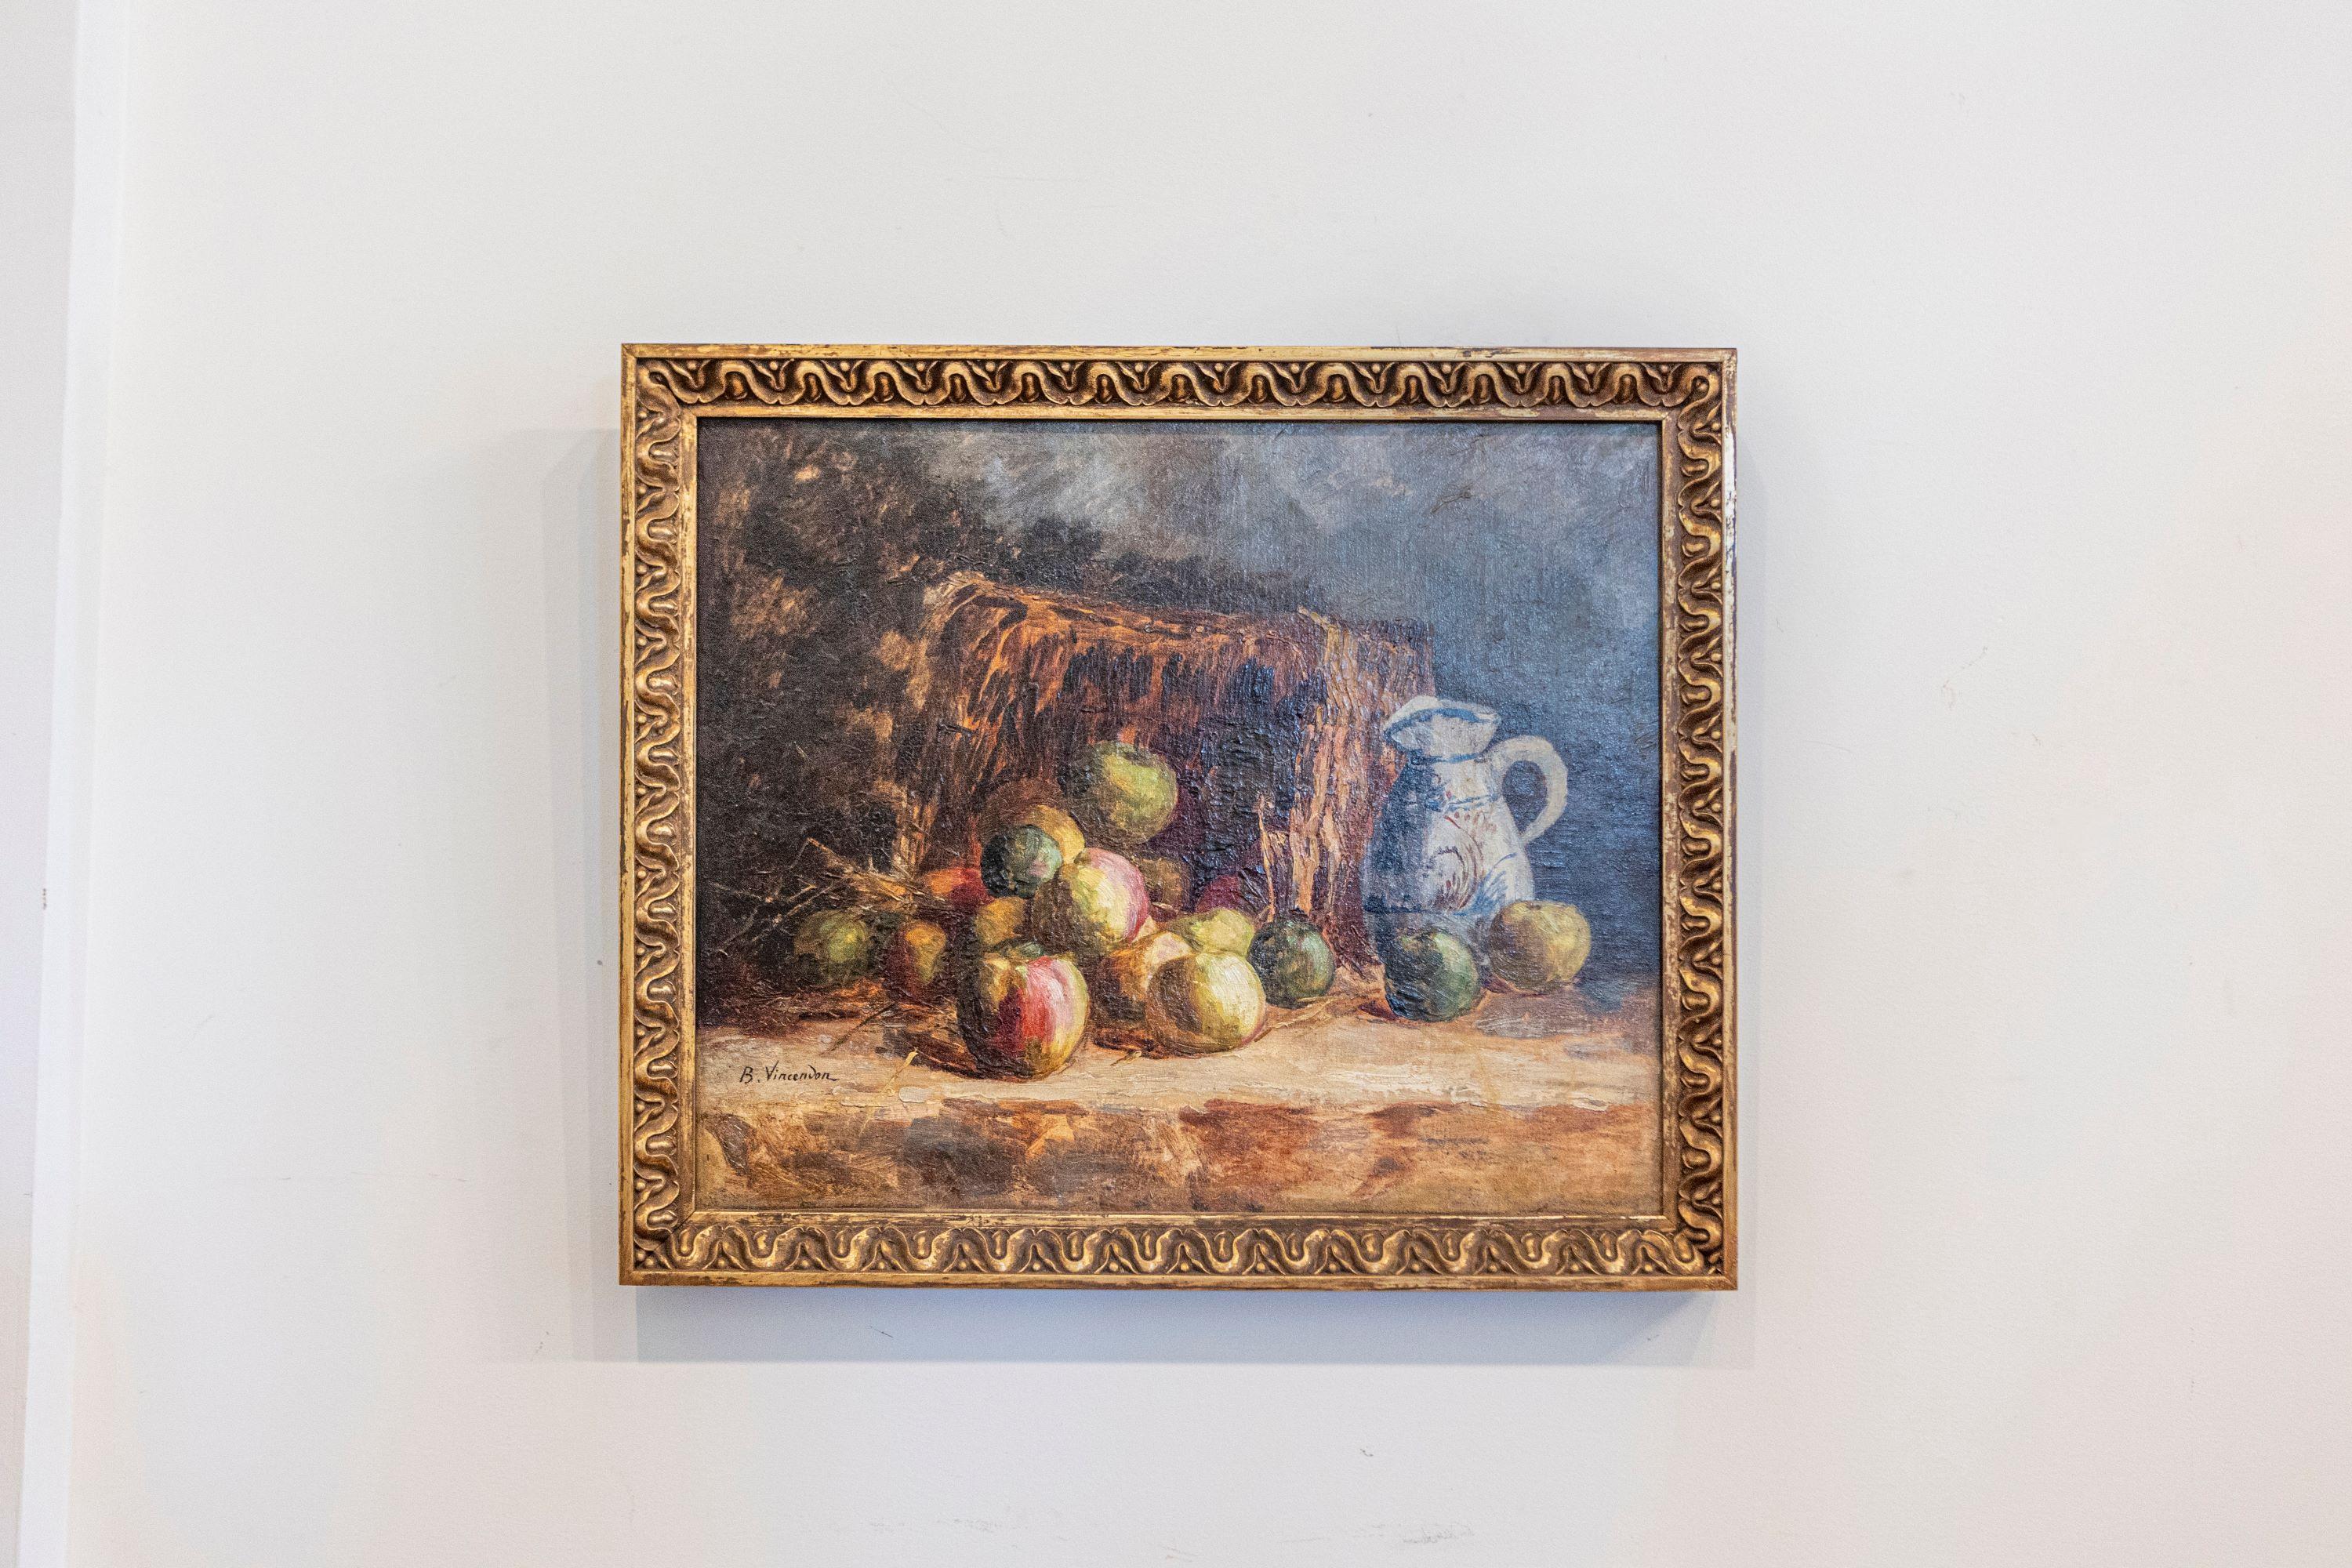 A French medium size still life oil painting signed by Berthe Vincendon from the late 19th century, depicting fruits and a pitcher. Set within a richly carved giltwood frame, this French painting features a basket with fruits and pitcher. Occupying